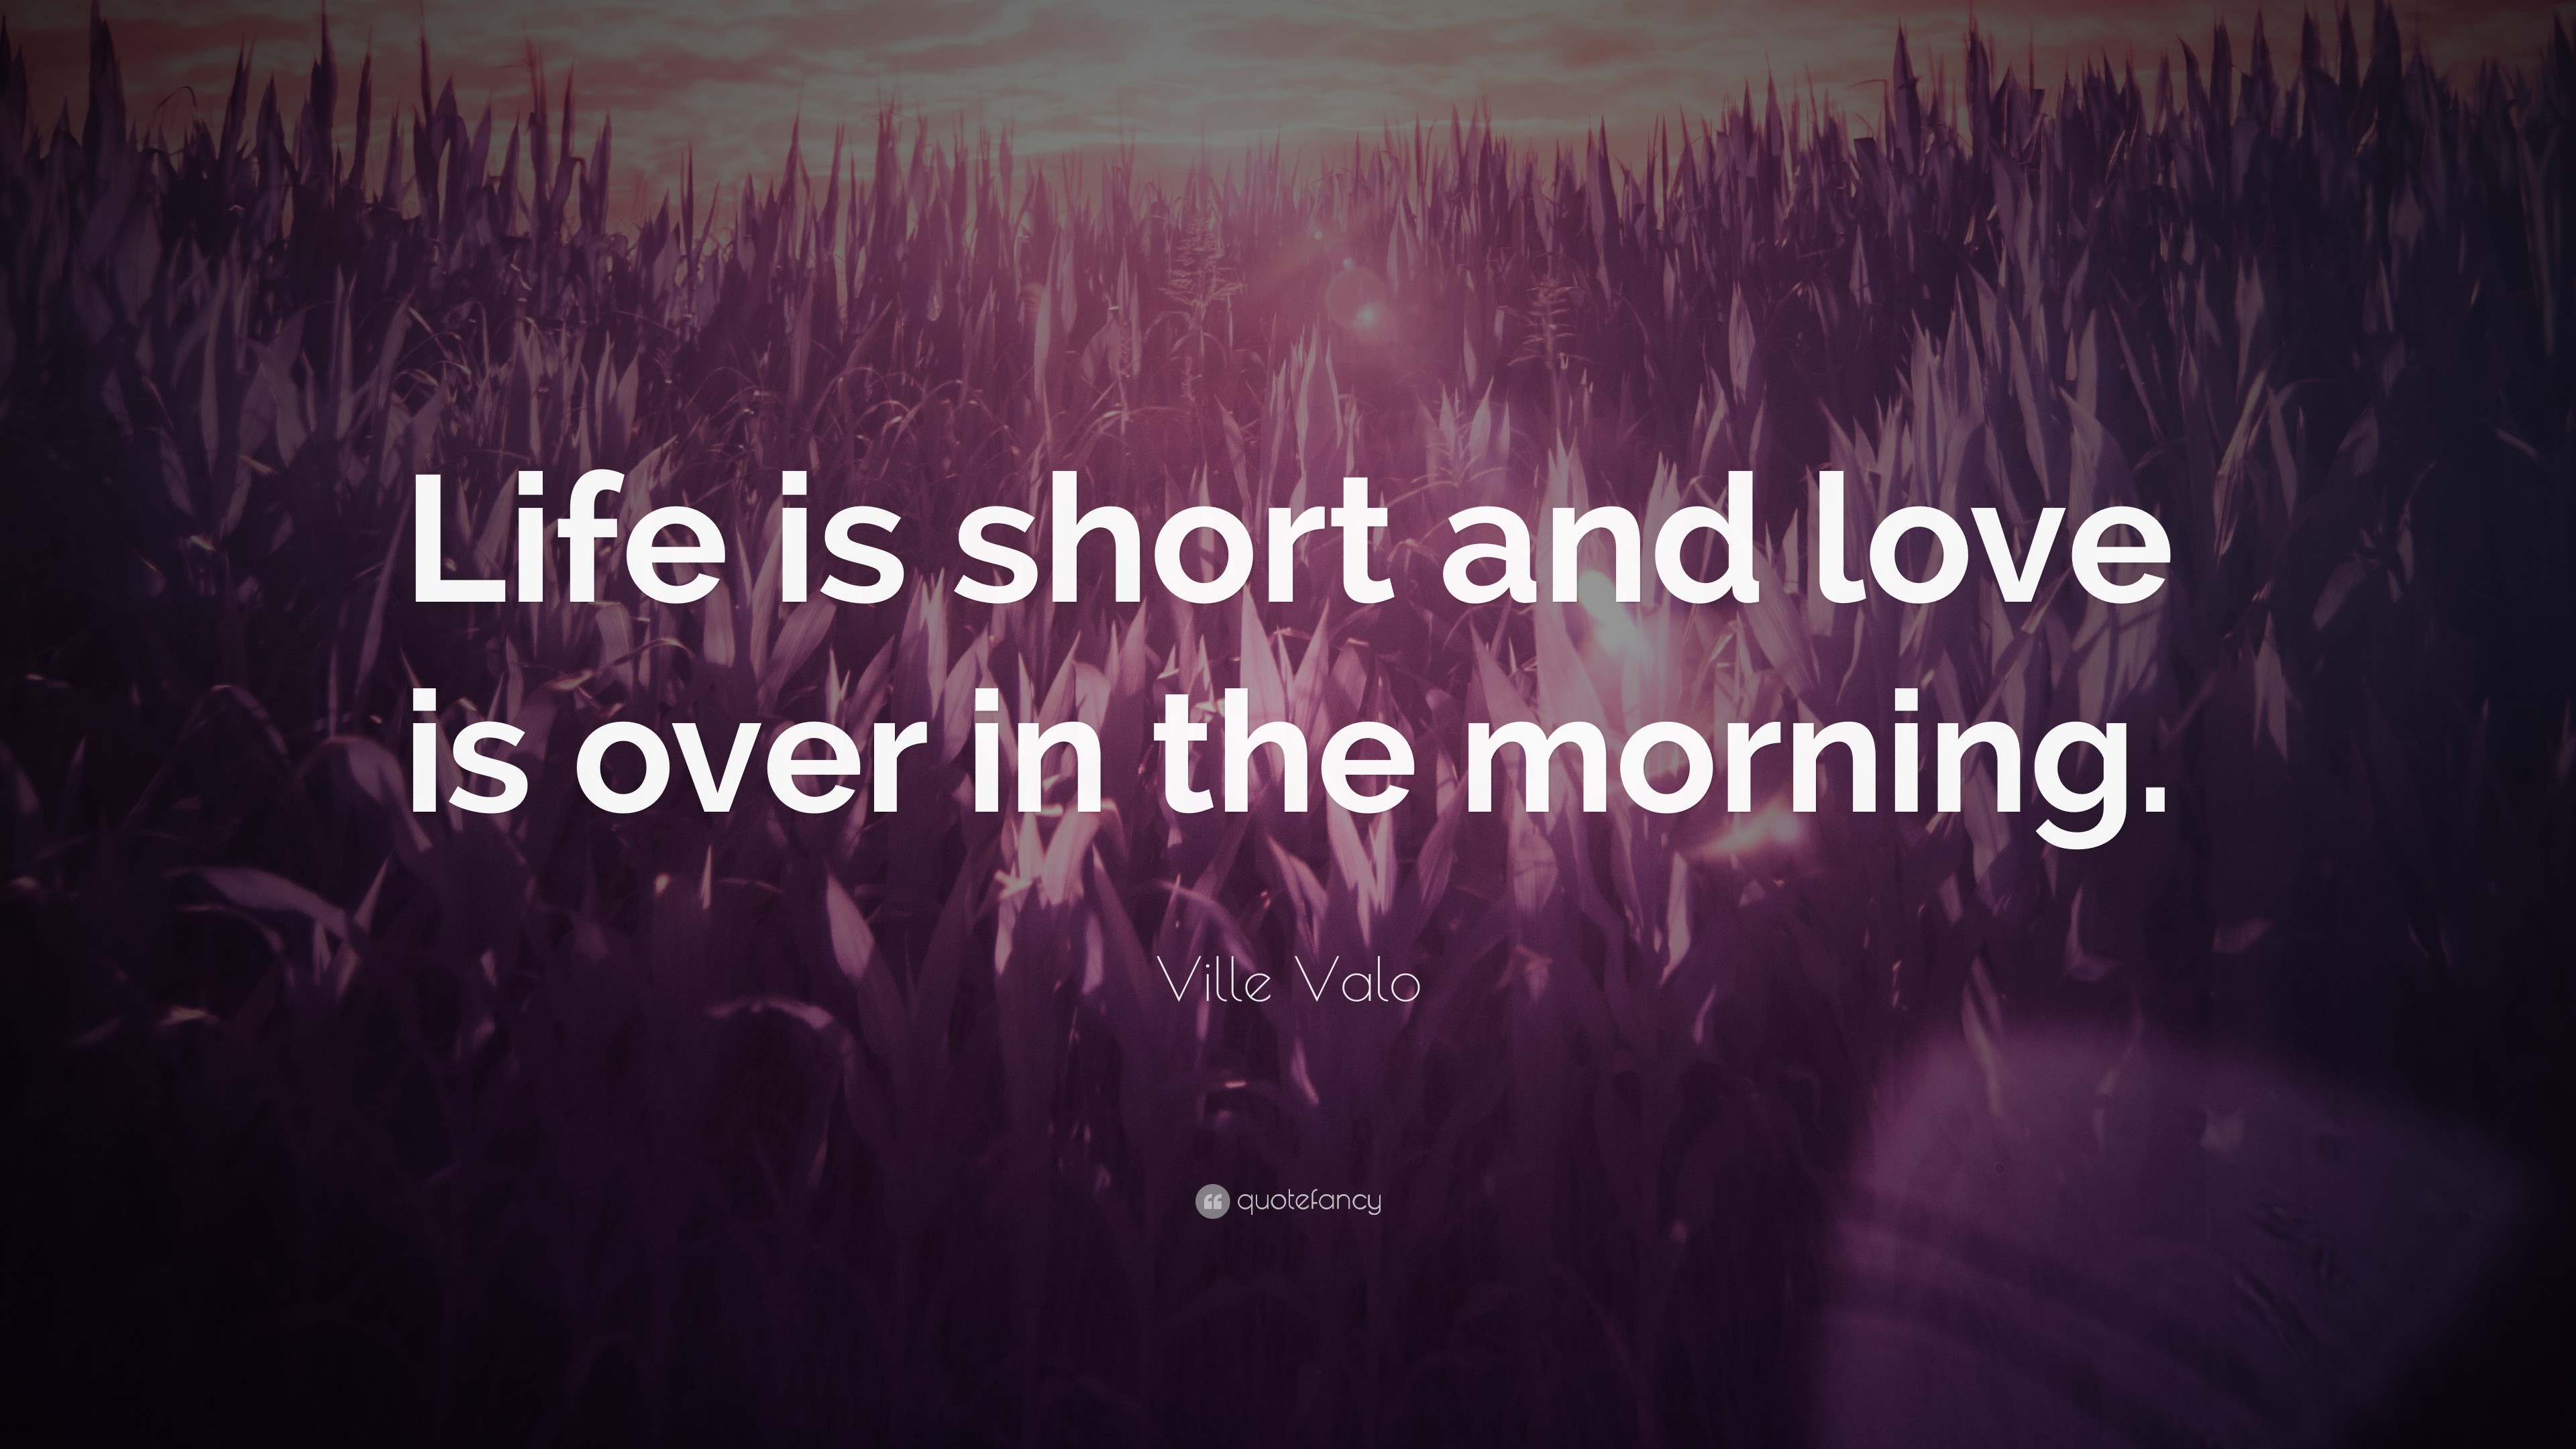 3840x2160 Ville Valo Quote: “Life is short and love is over in the morning.